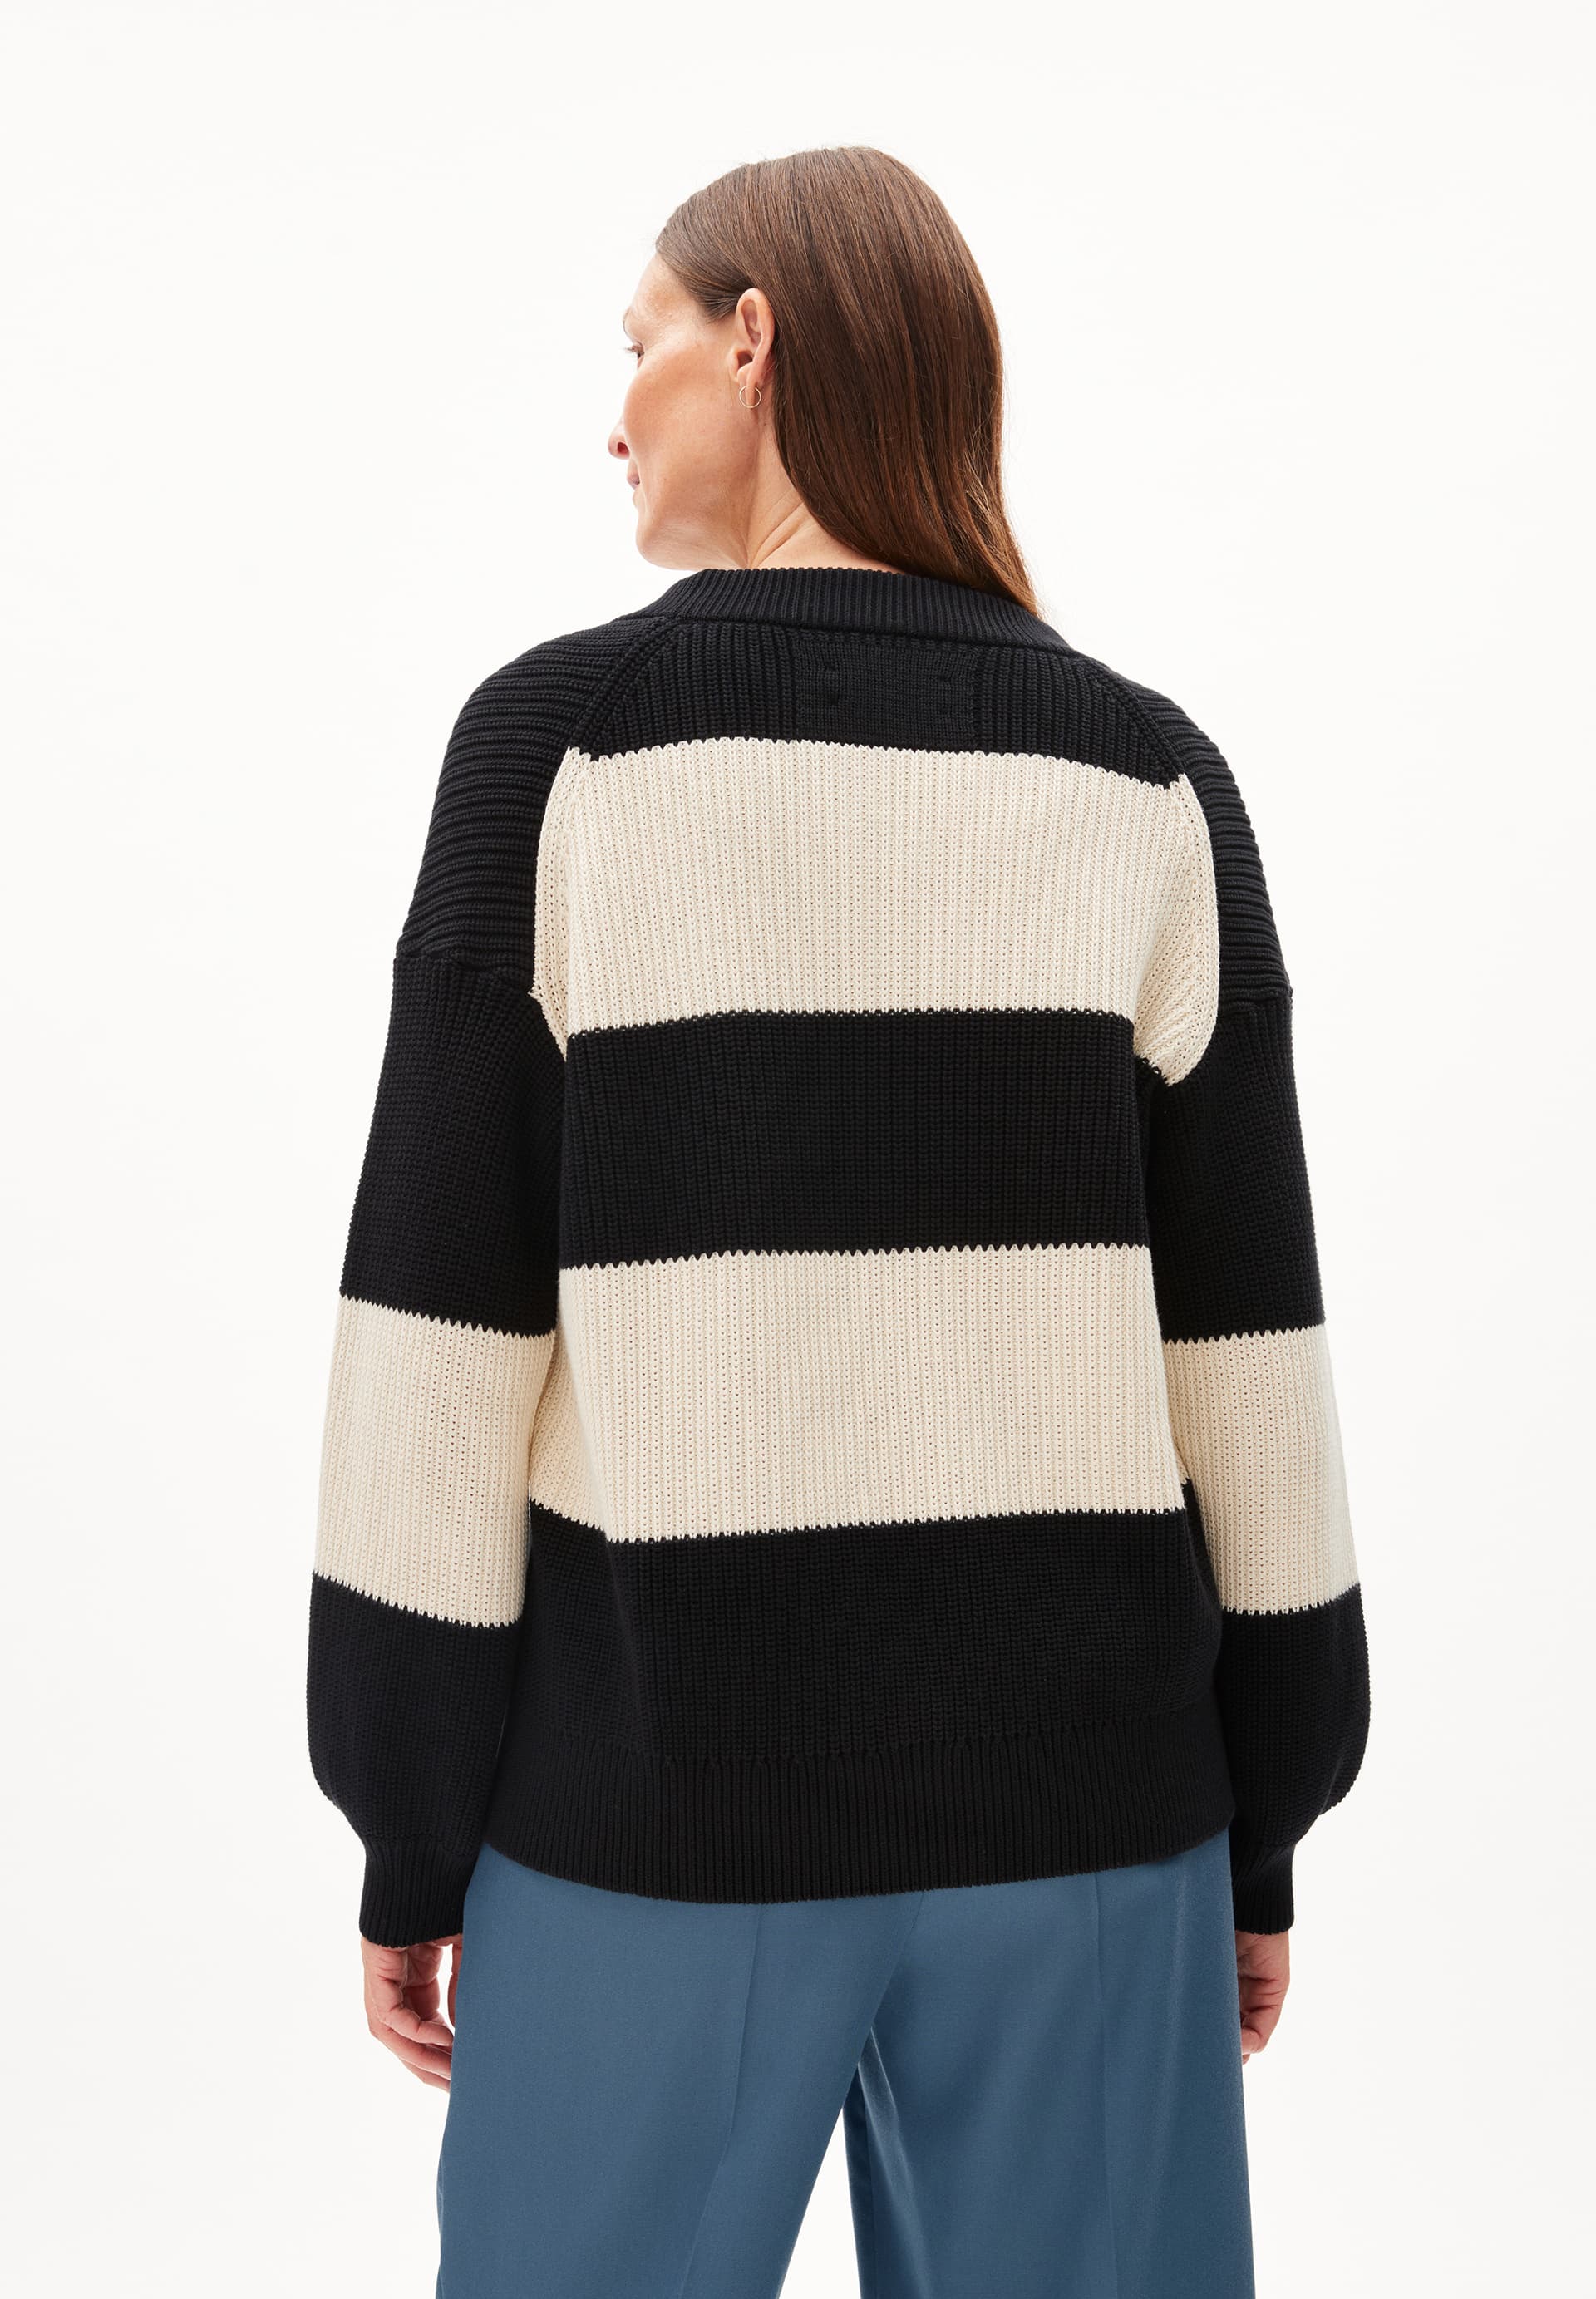 HAAYLE BLOCKSTRIPES Sweater Loose Fit made of Organic Cotton